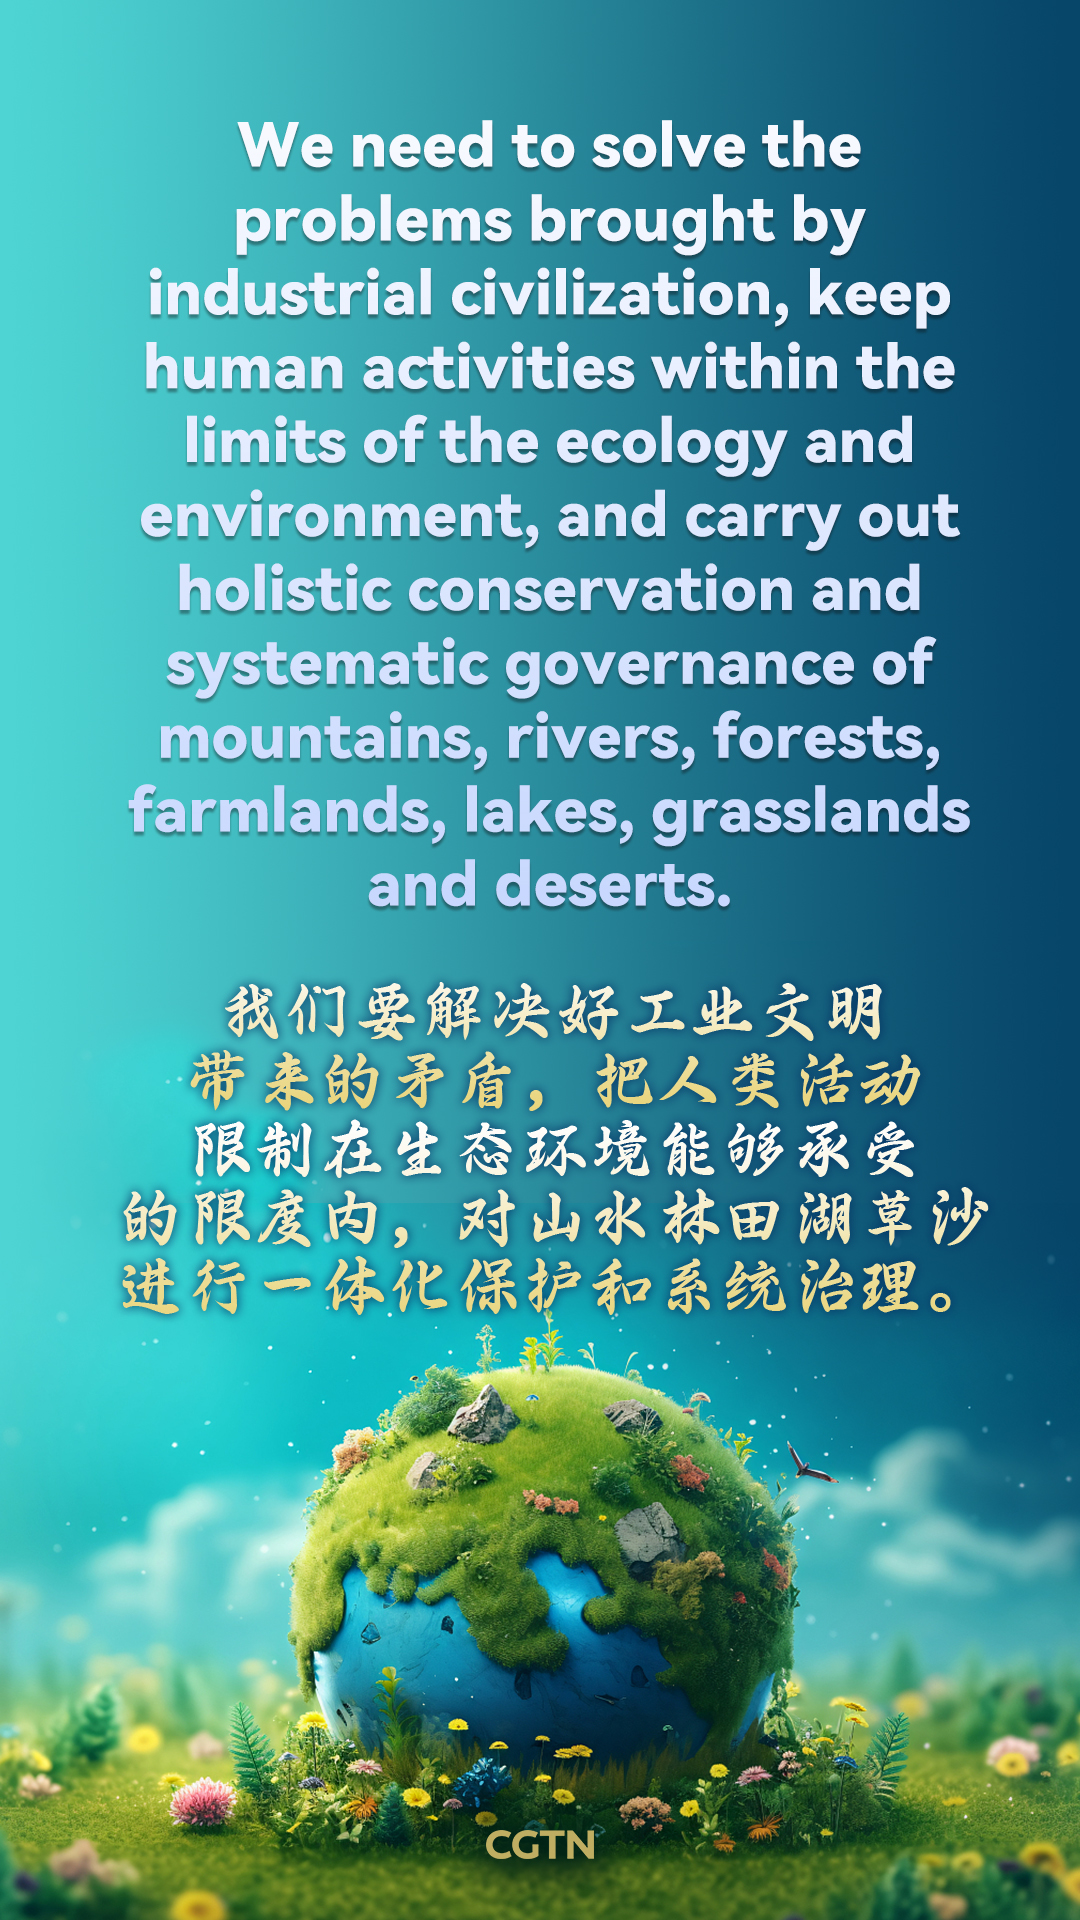 Key quotes of Xi Jinping on protecting the Earth